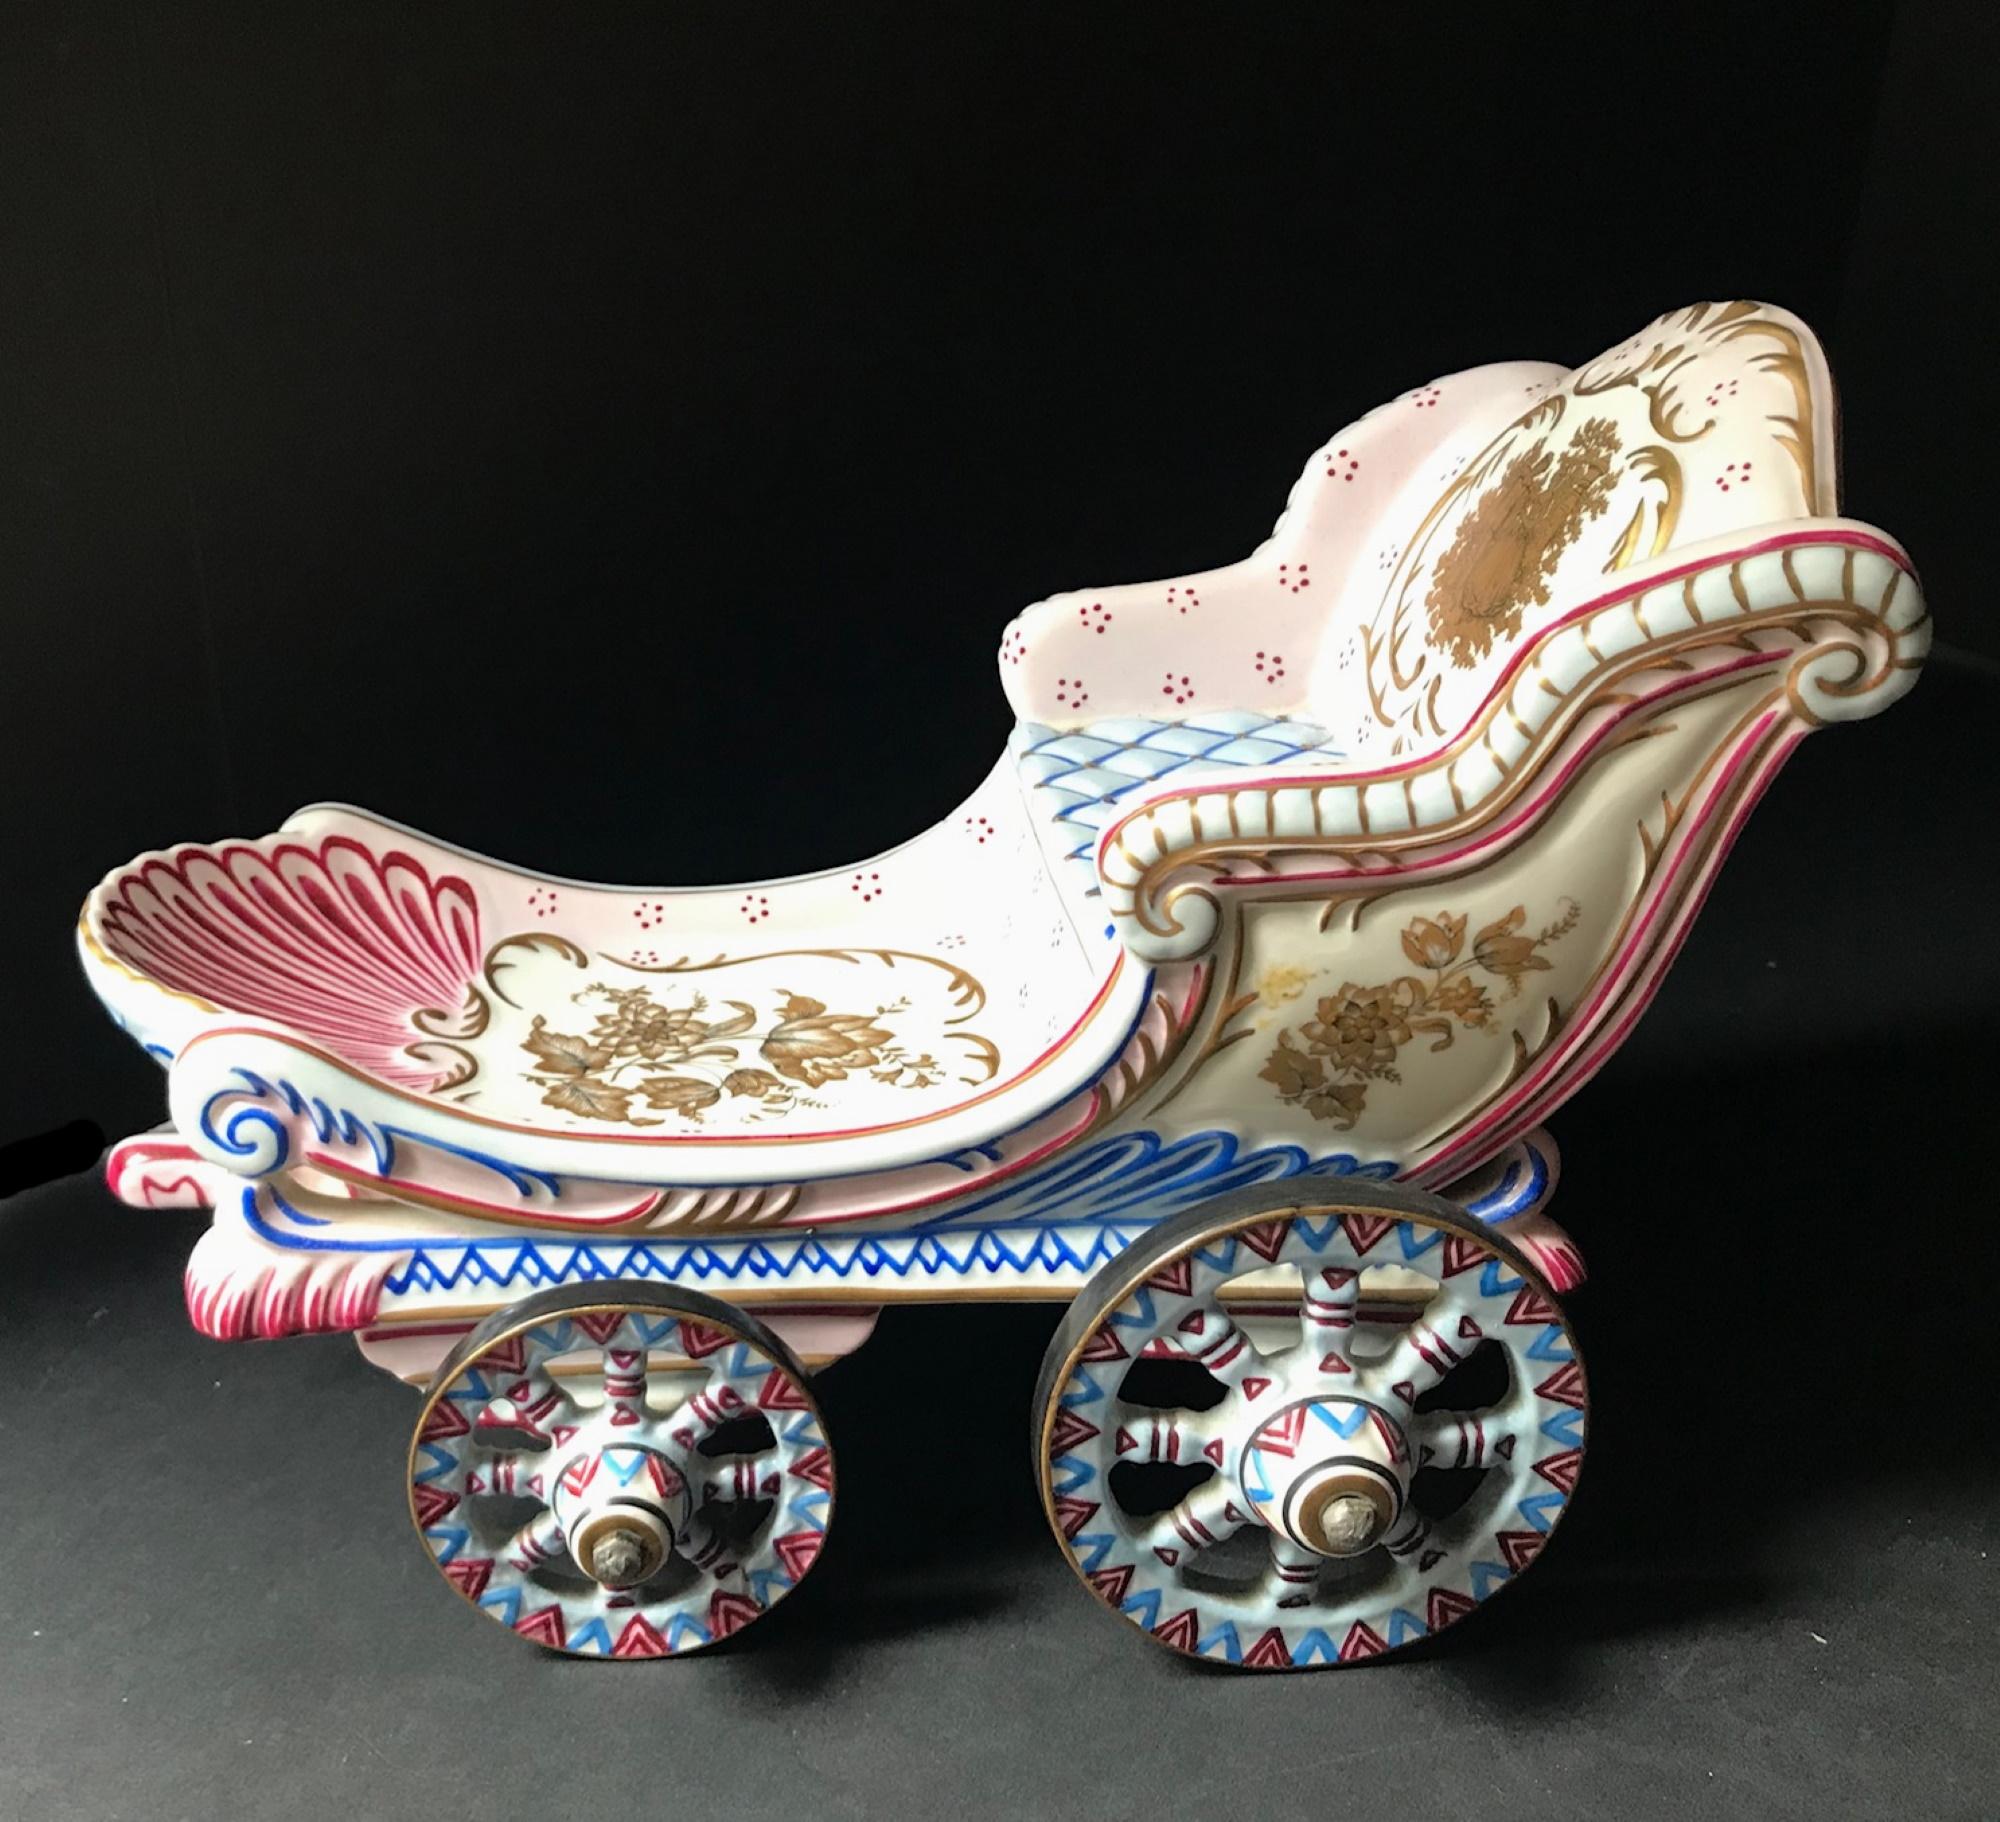 This highly decorative porcelain is pristine and functions with ease. The wheels of the cart move it back and forth securely. The rear of the carriage features the Royal Coat of Arms of the Kingdom of Liechtenstein, nestled within Switzerland. The